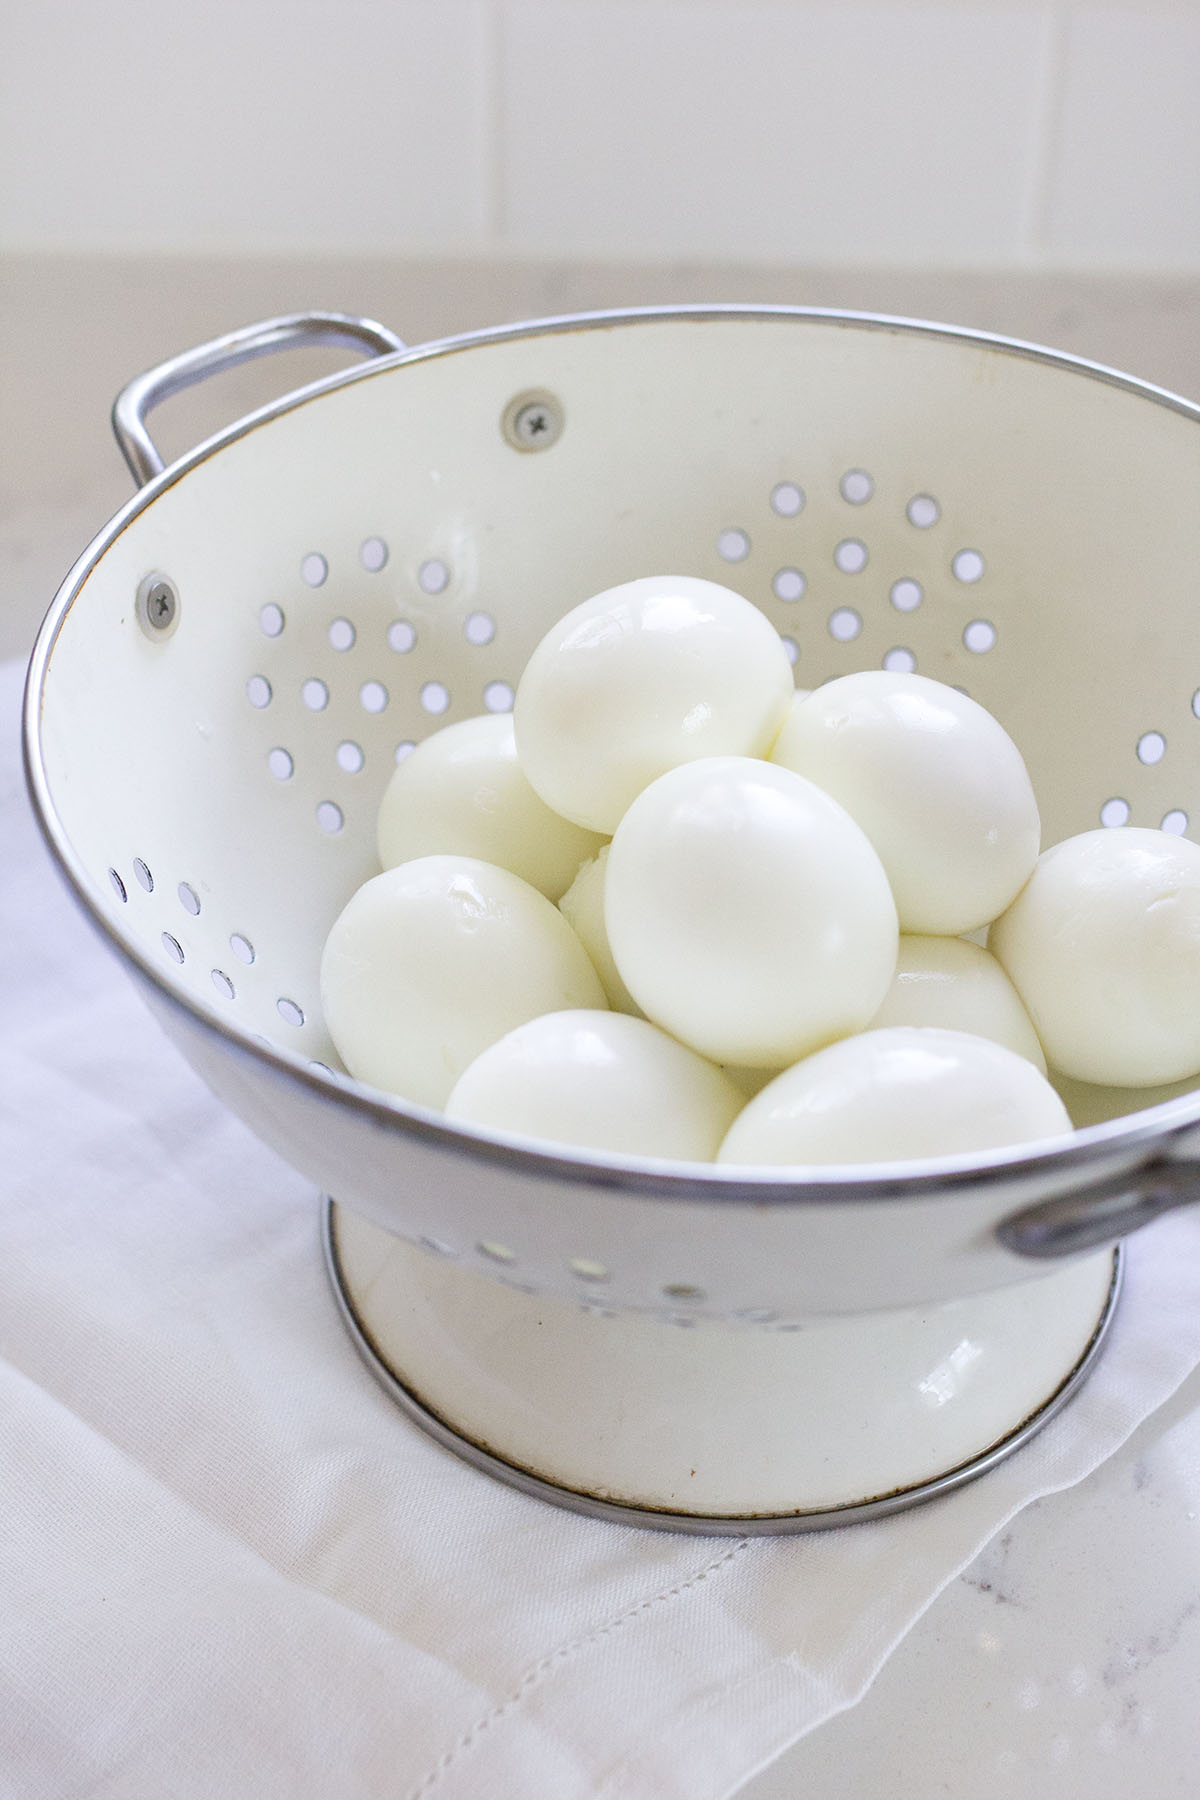 How to cook easy to peel hard boiled eggs